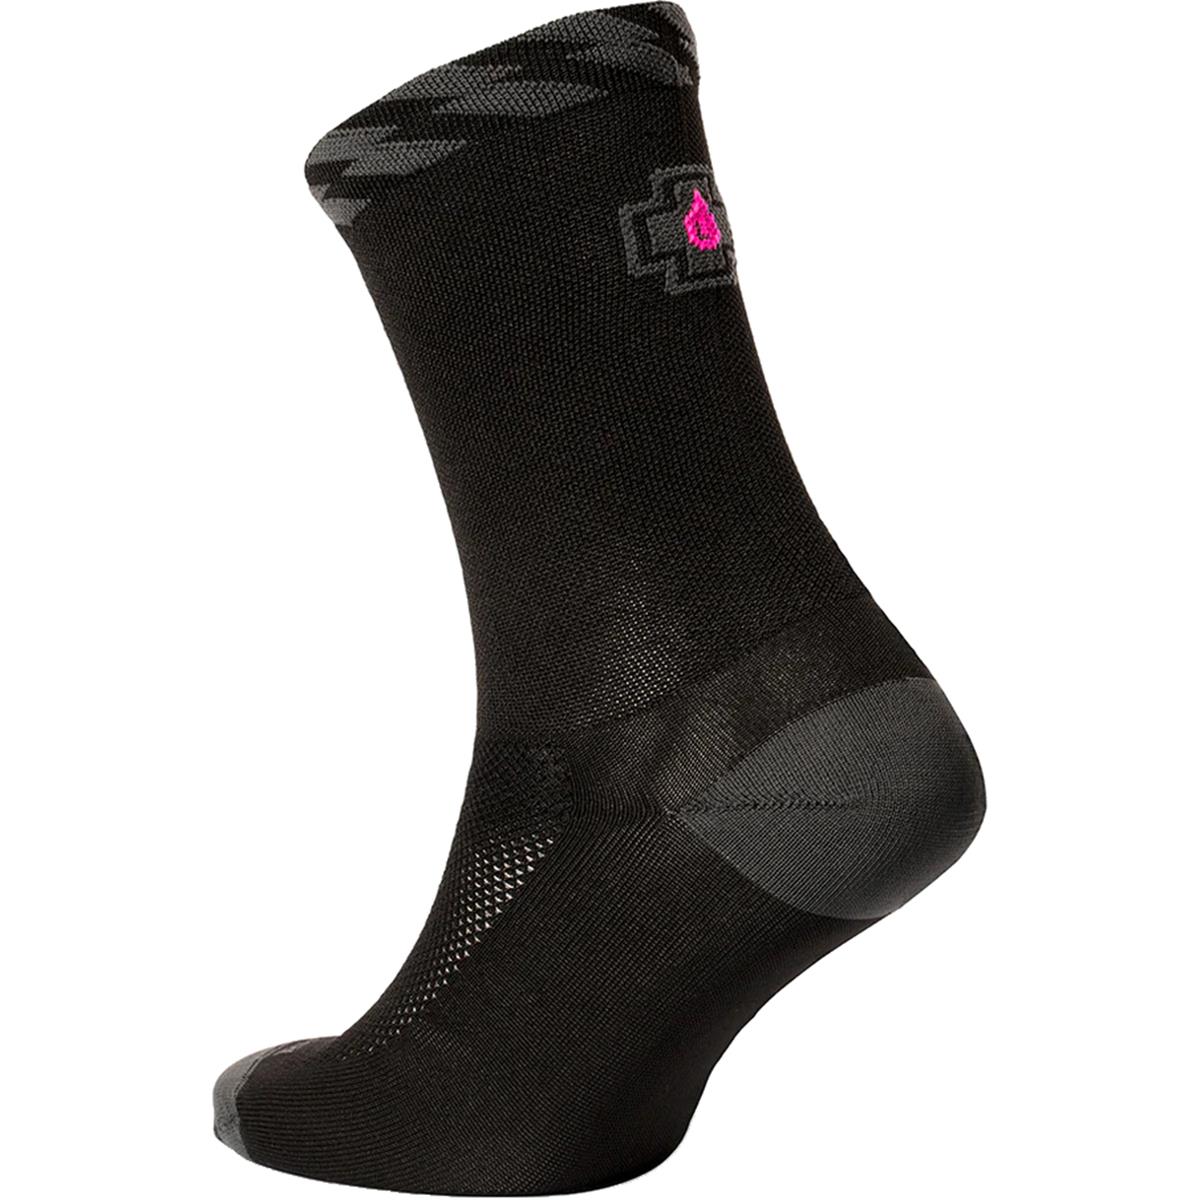 Muc-Off Chausettes Riders Noir